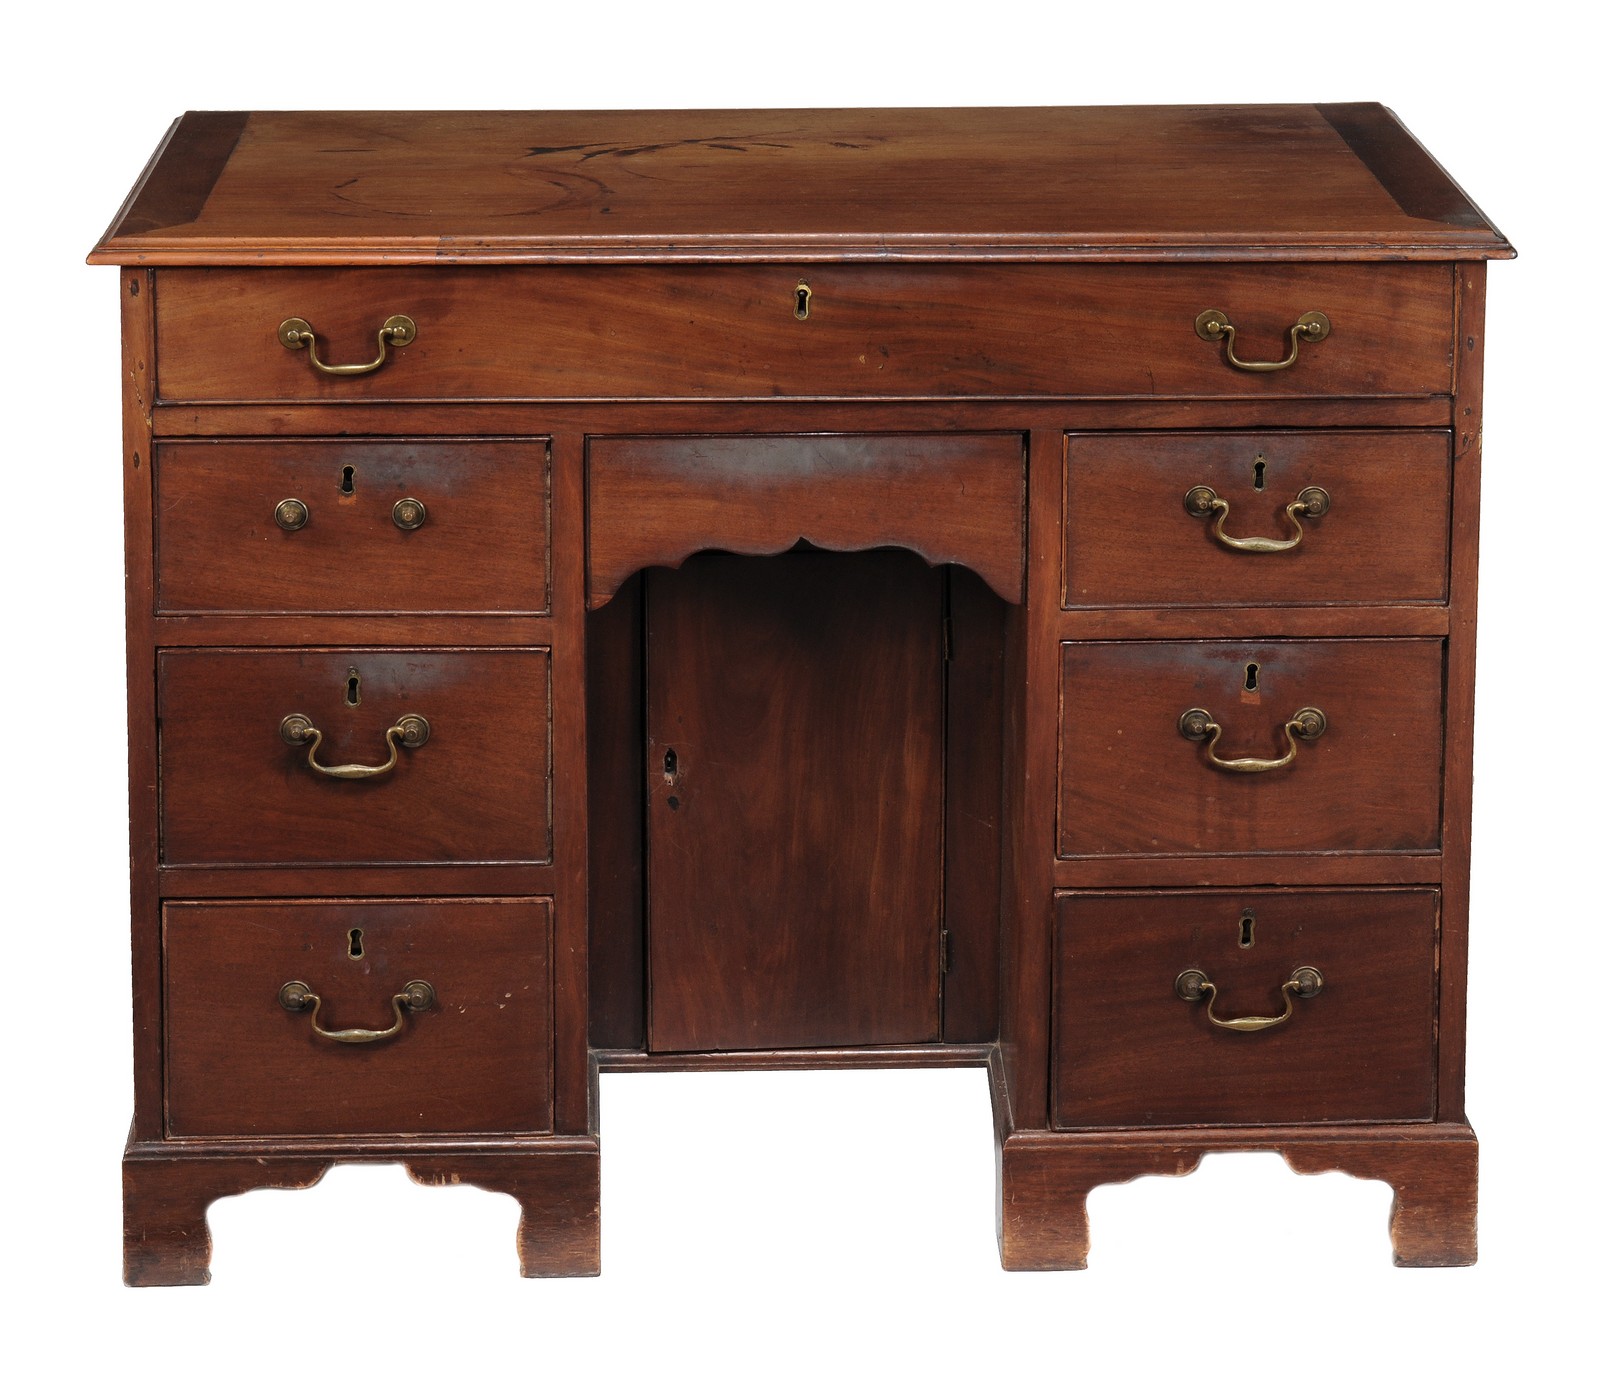 A George II mahogany kneehole desk circa 1740 with a rectangular top, six short drawers flanking a